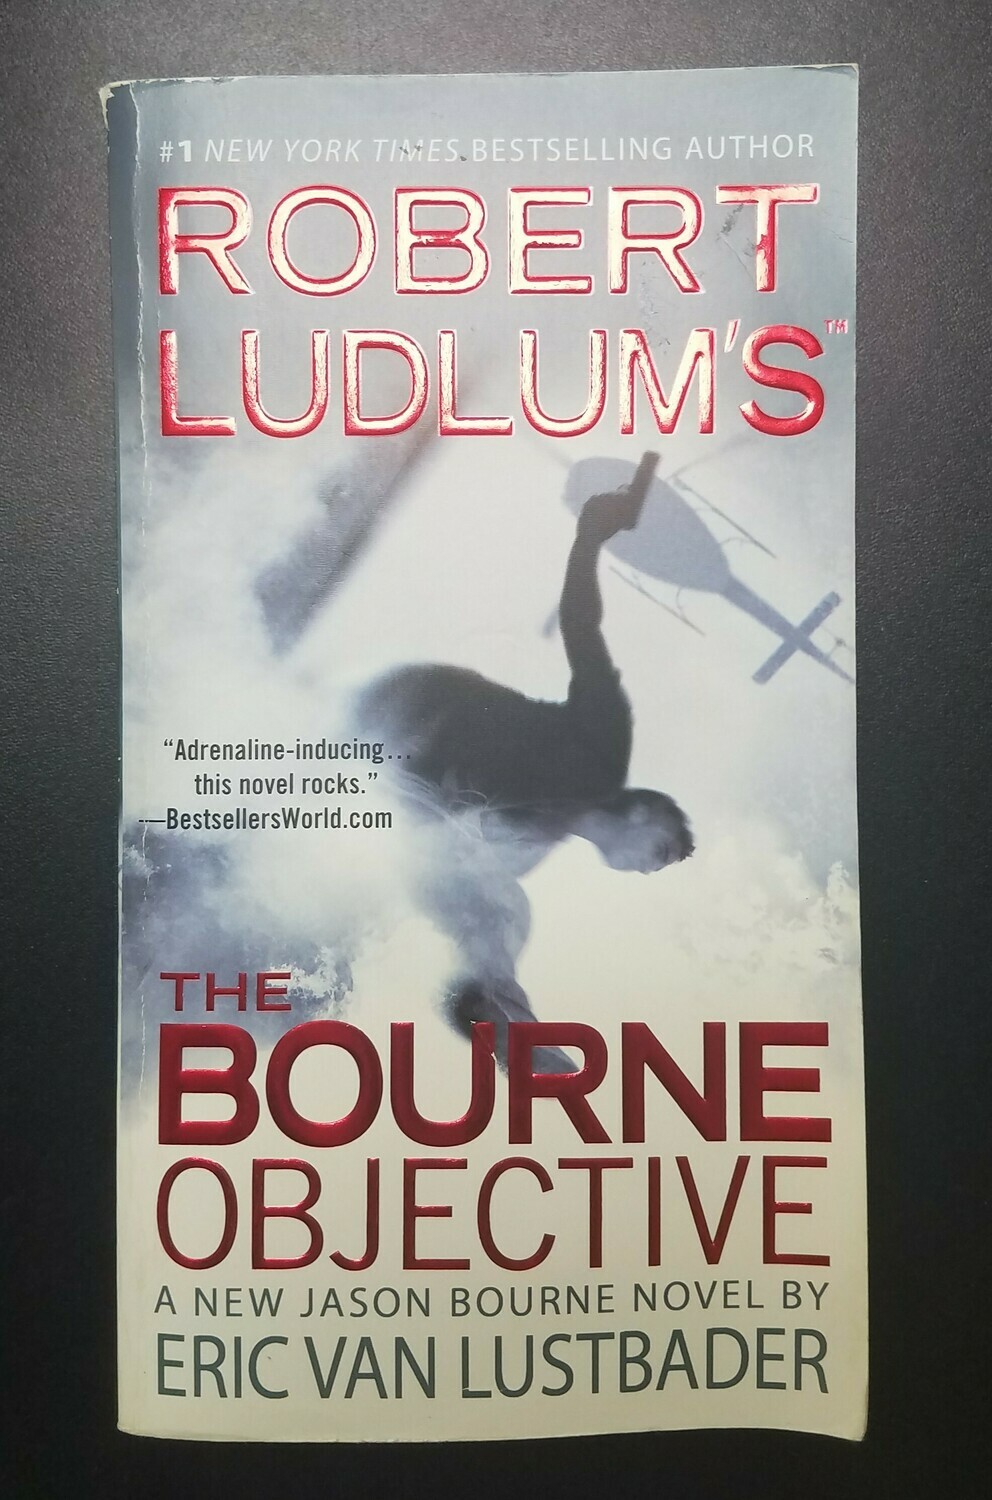 The Bourne Objective by Eric Van Lustbader